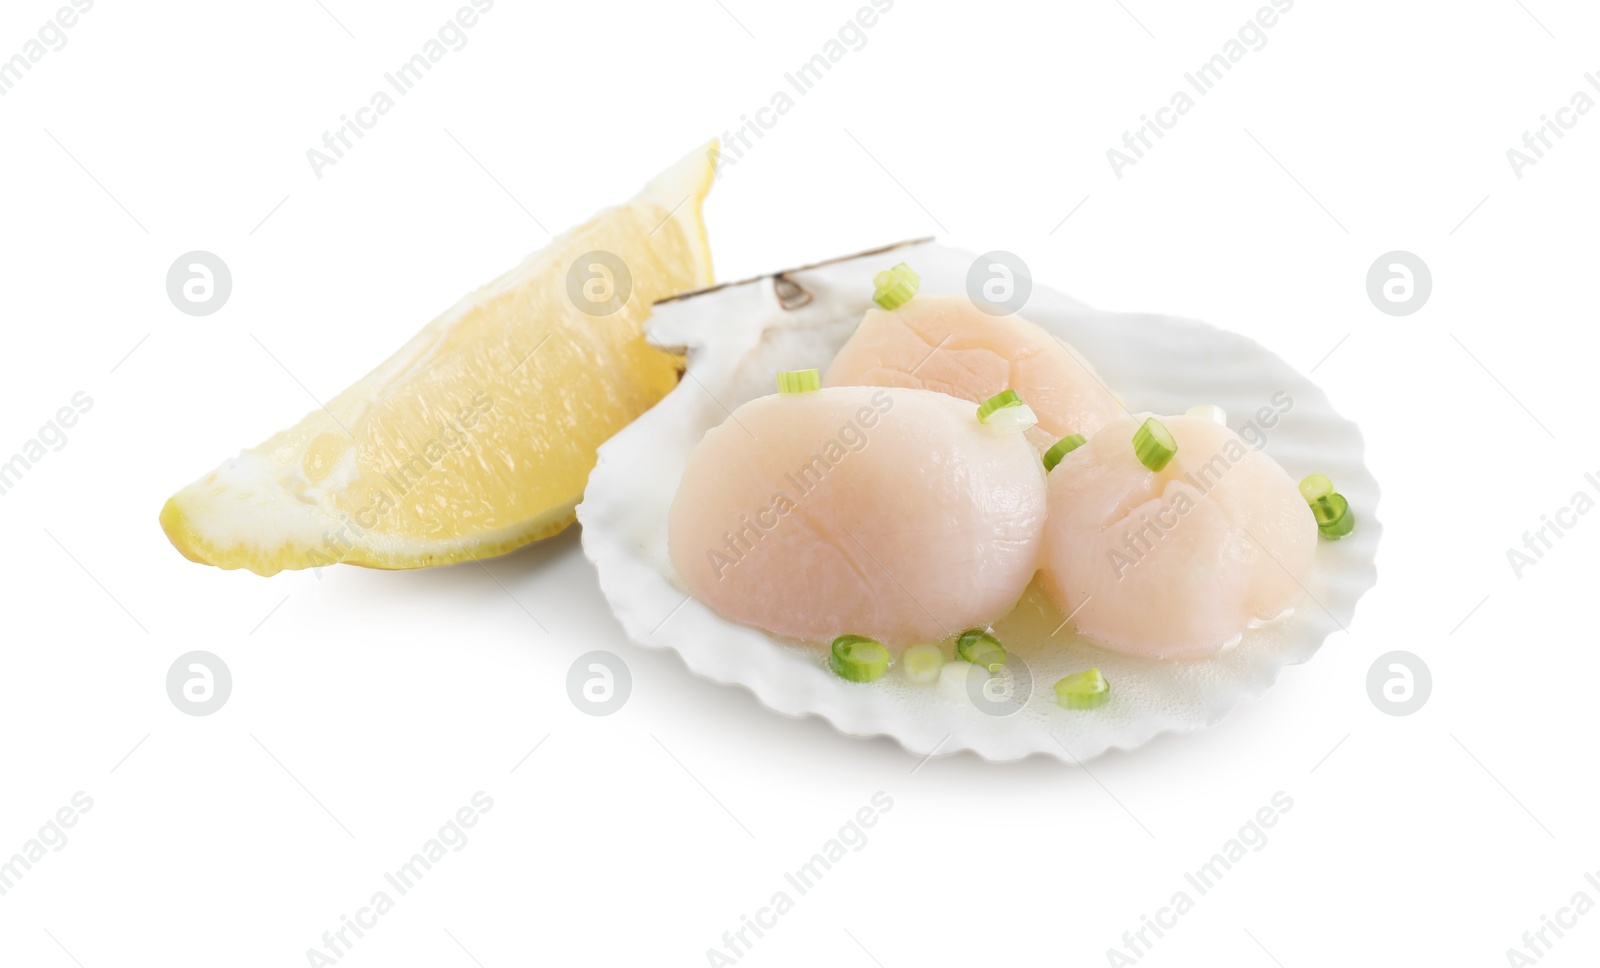 Photo of Raw scallops with green onion, shell and lemon slice isolated on white